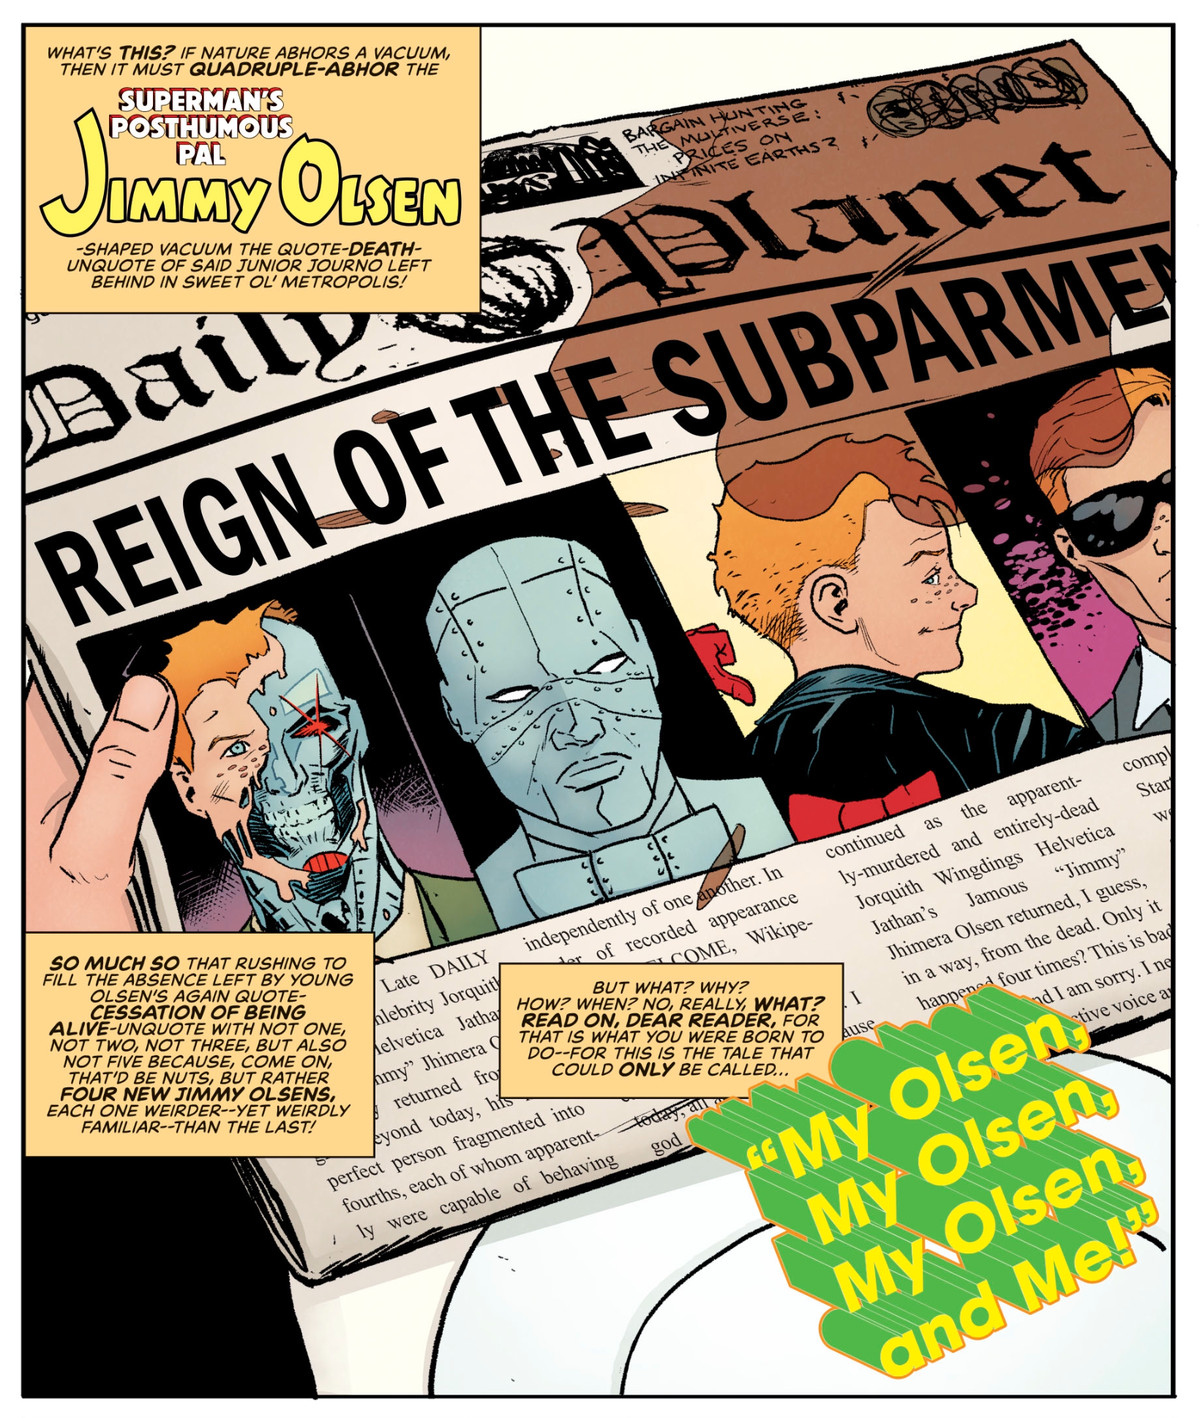 “Reign of the Subparmen” declares a newspaper headline about four mysterious new Jimmy Olsens (based on the Reign of the Supermen story arc) who have appeared in Metropolis. Captions cite the title of the story as “My Olsen, My Olsen, My Olsen, and Me!” in Superman’s Pal Jimmy Olsen #8, DC Comics (2020). 